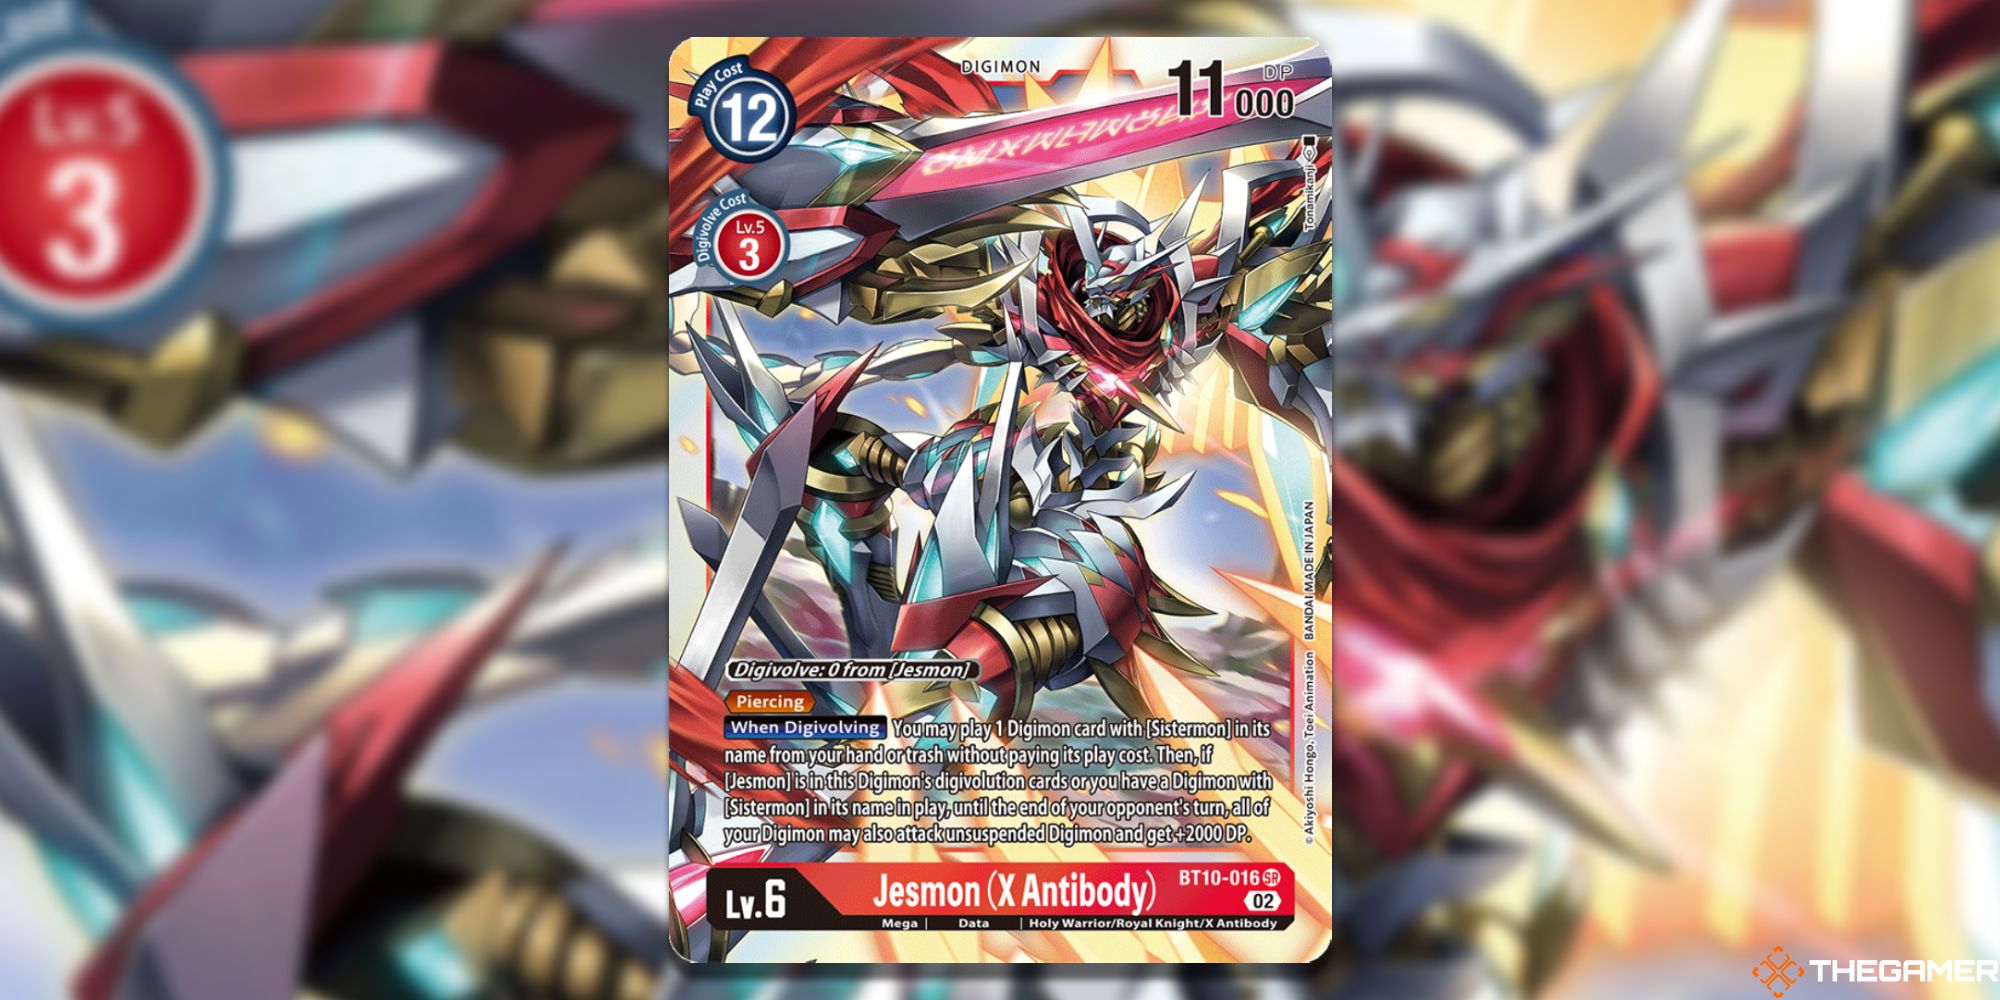 jesmon x antibody card from digimon card game with blur background